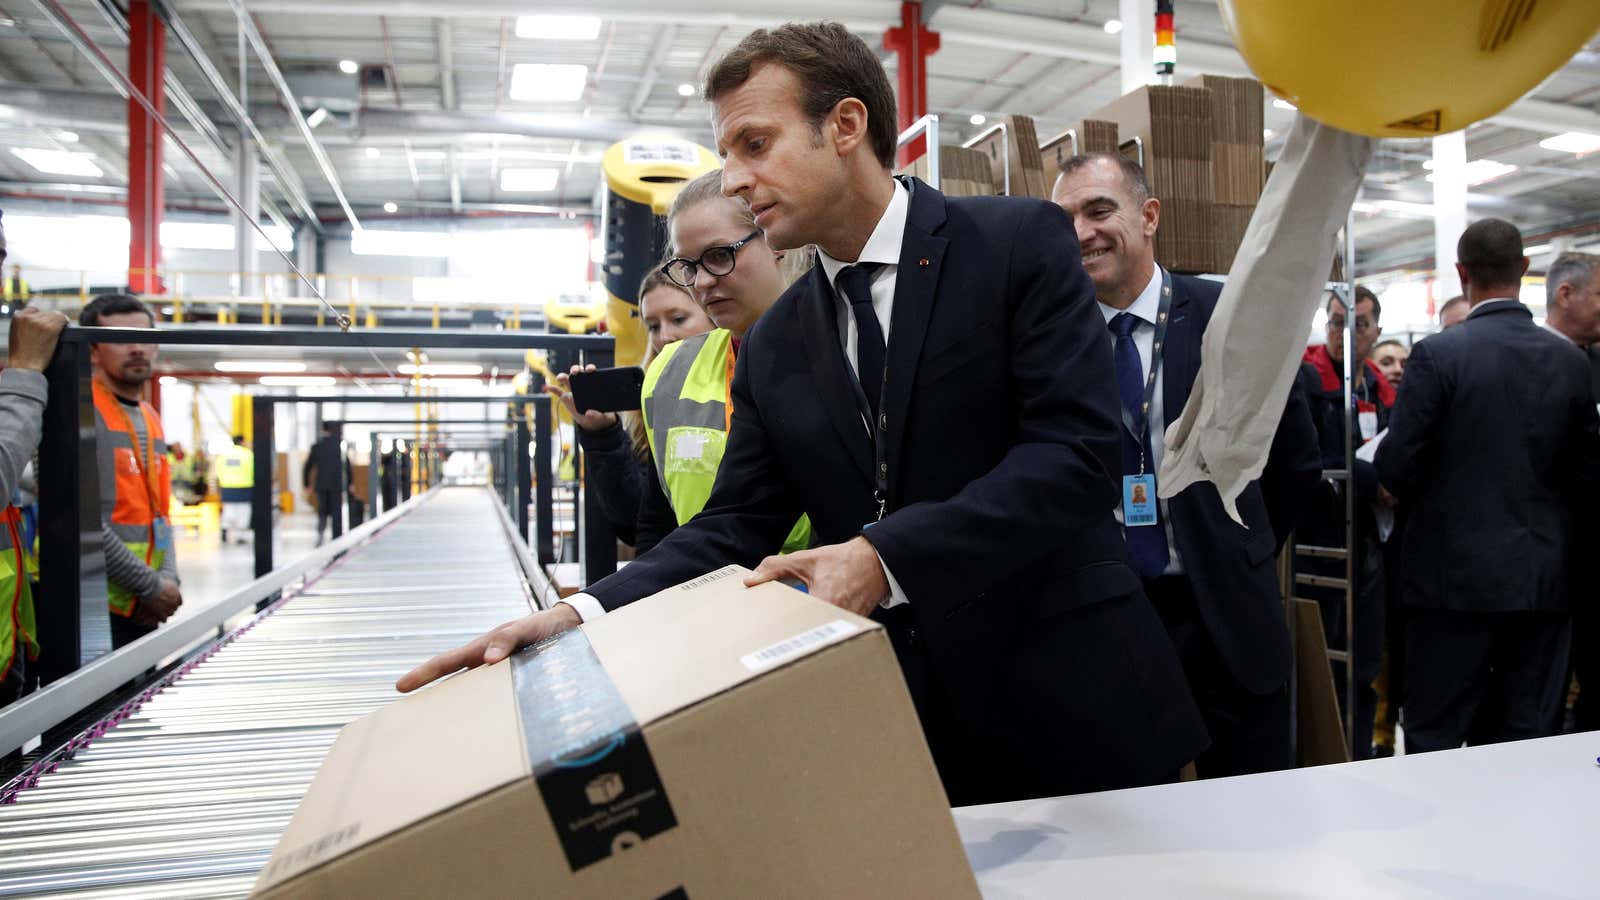 Back in 2017, French president Emmanuel Macron was helping open new Amazon facilities.